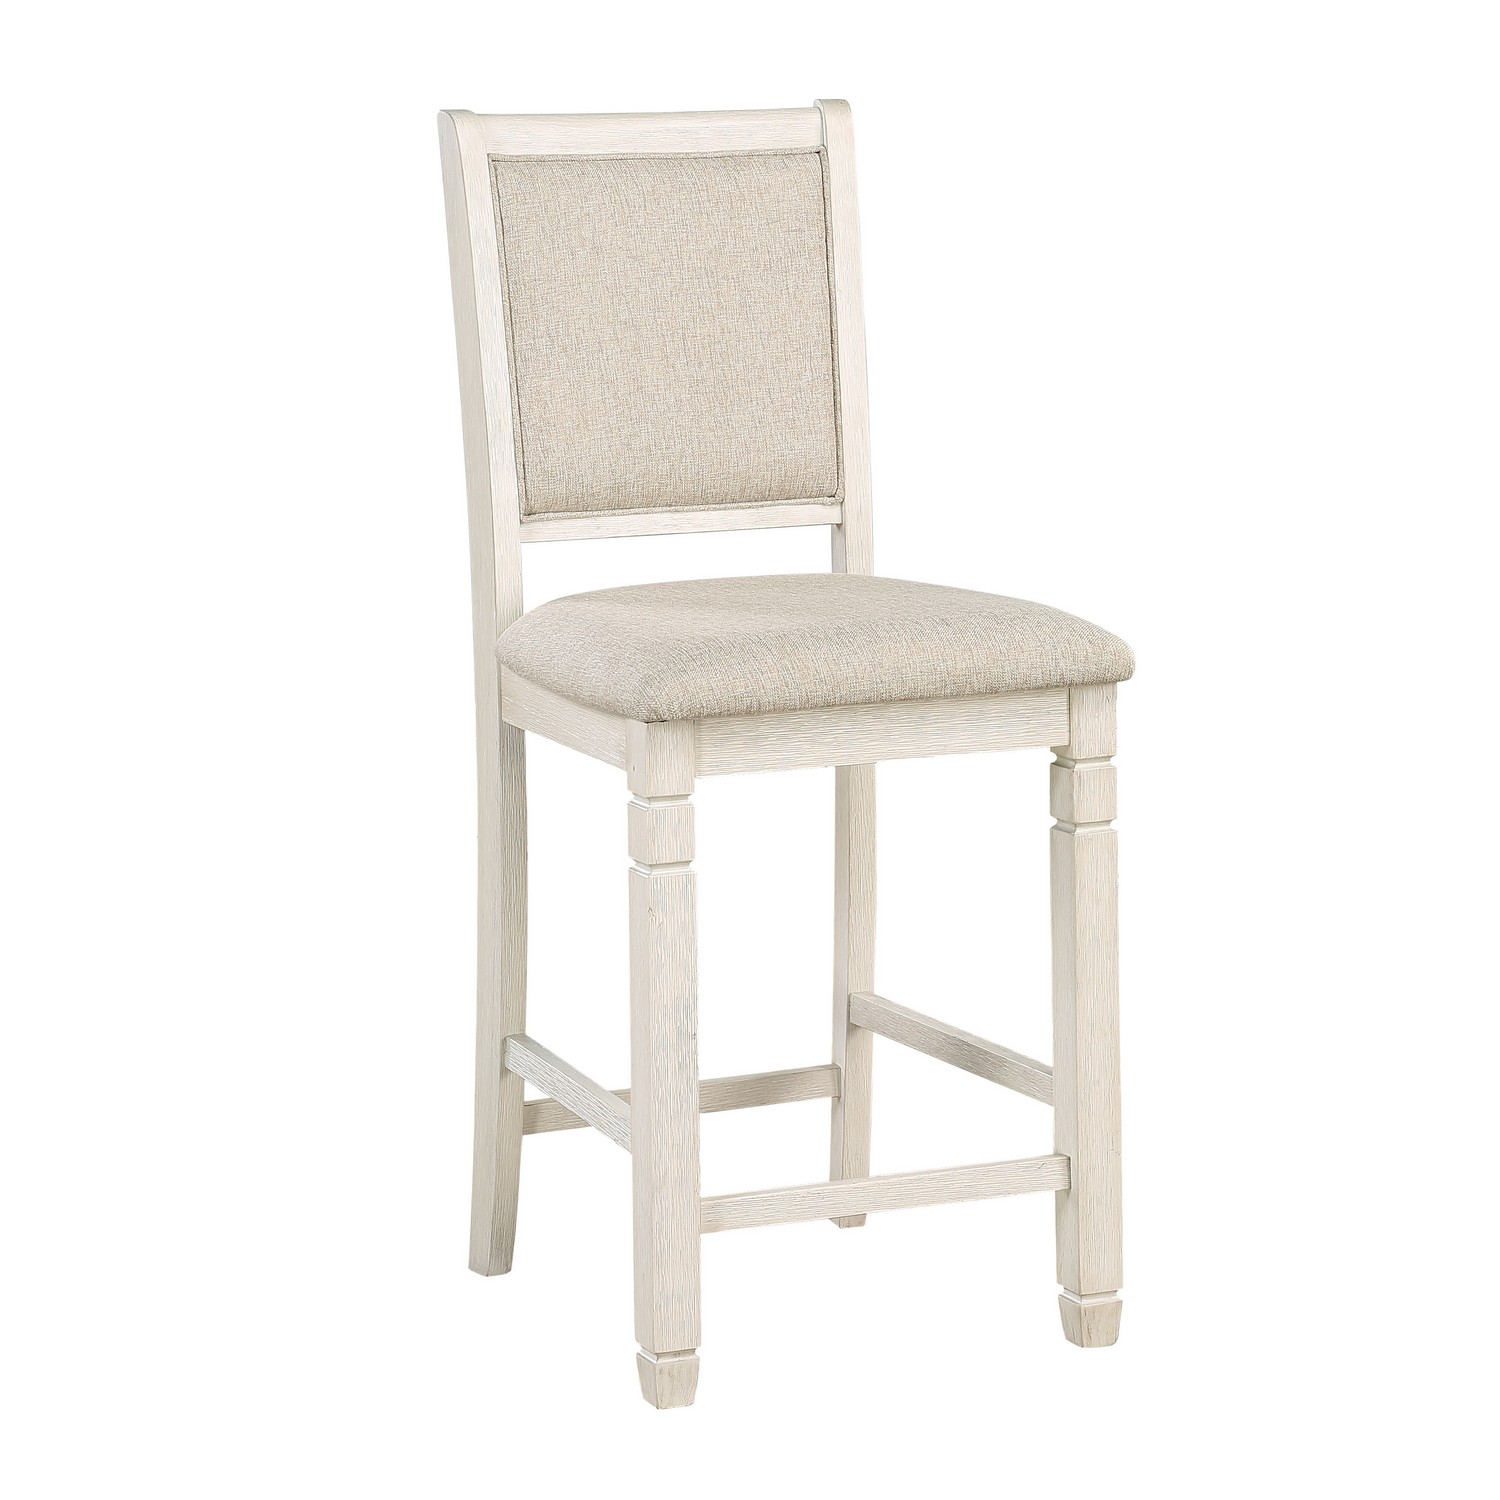 Homelegance Asher Counter Height Chair - Antique White